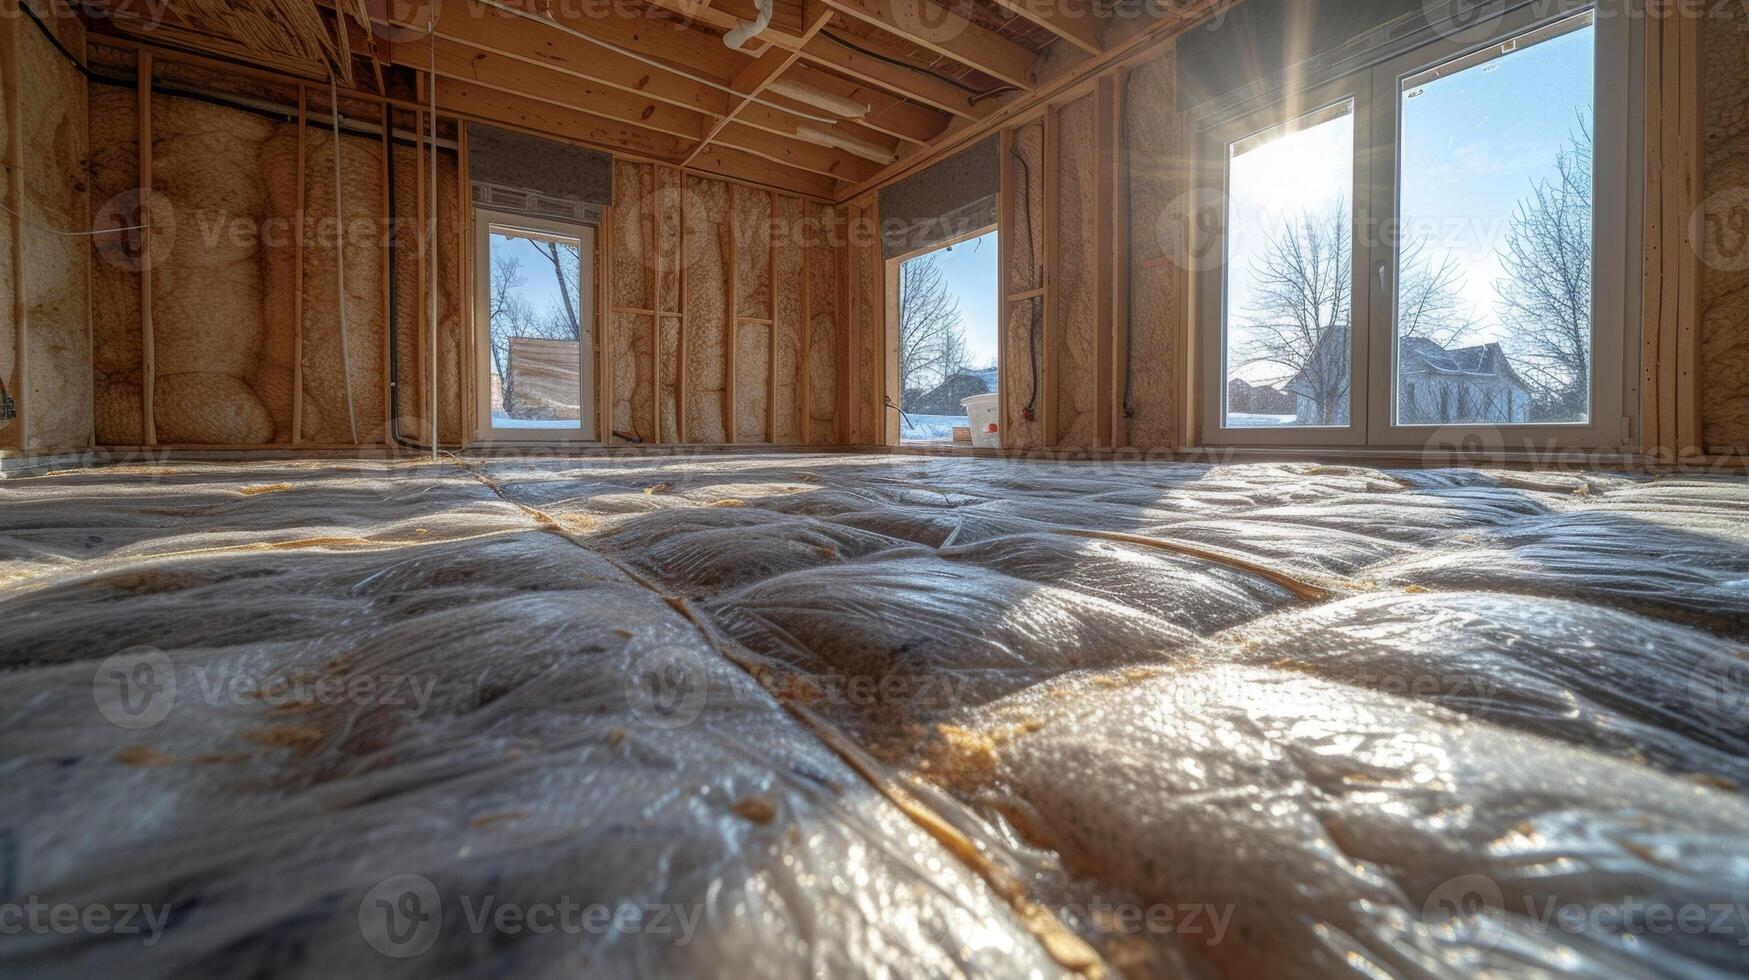 From the outside a newly renovated home looks no different but hidden beneath its walls and floors are layers of protective insulation including fibergl cellulose and foam photo